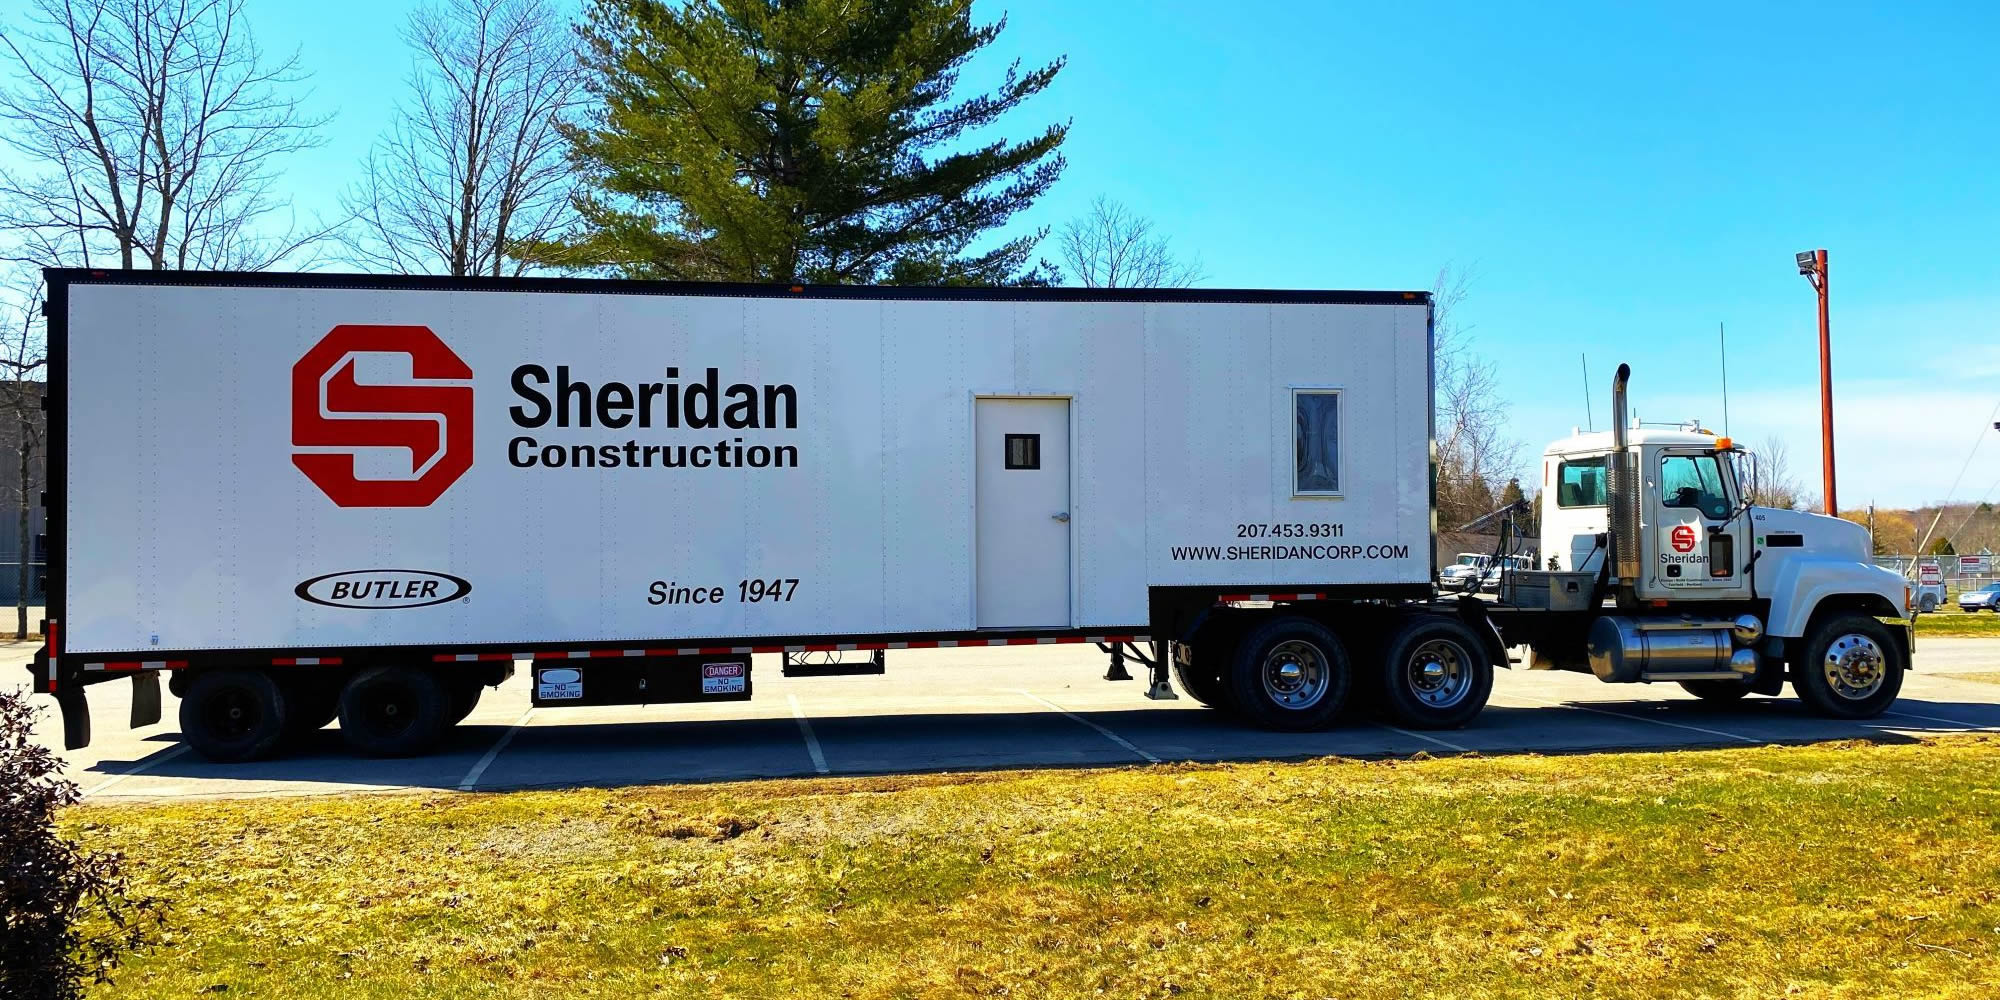 One of Sheridan Construction's tractor trailer about to leave to go to a job site.